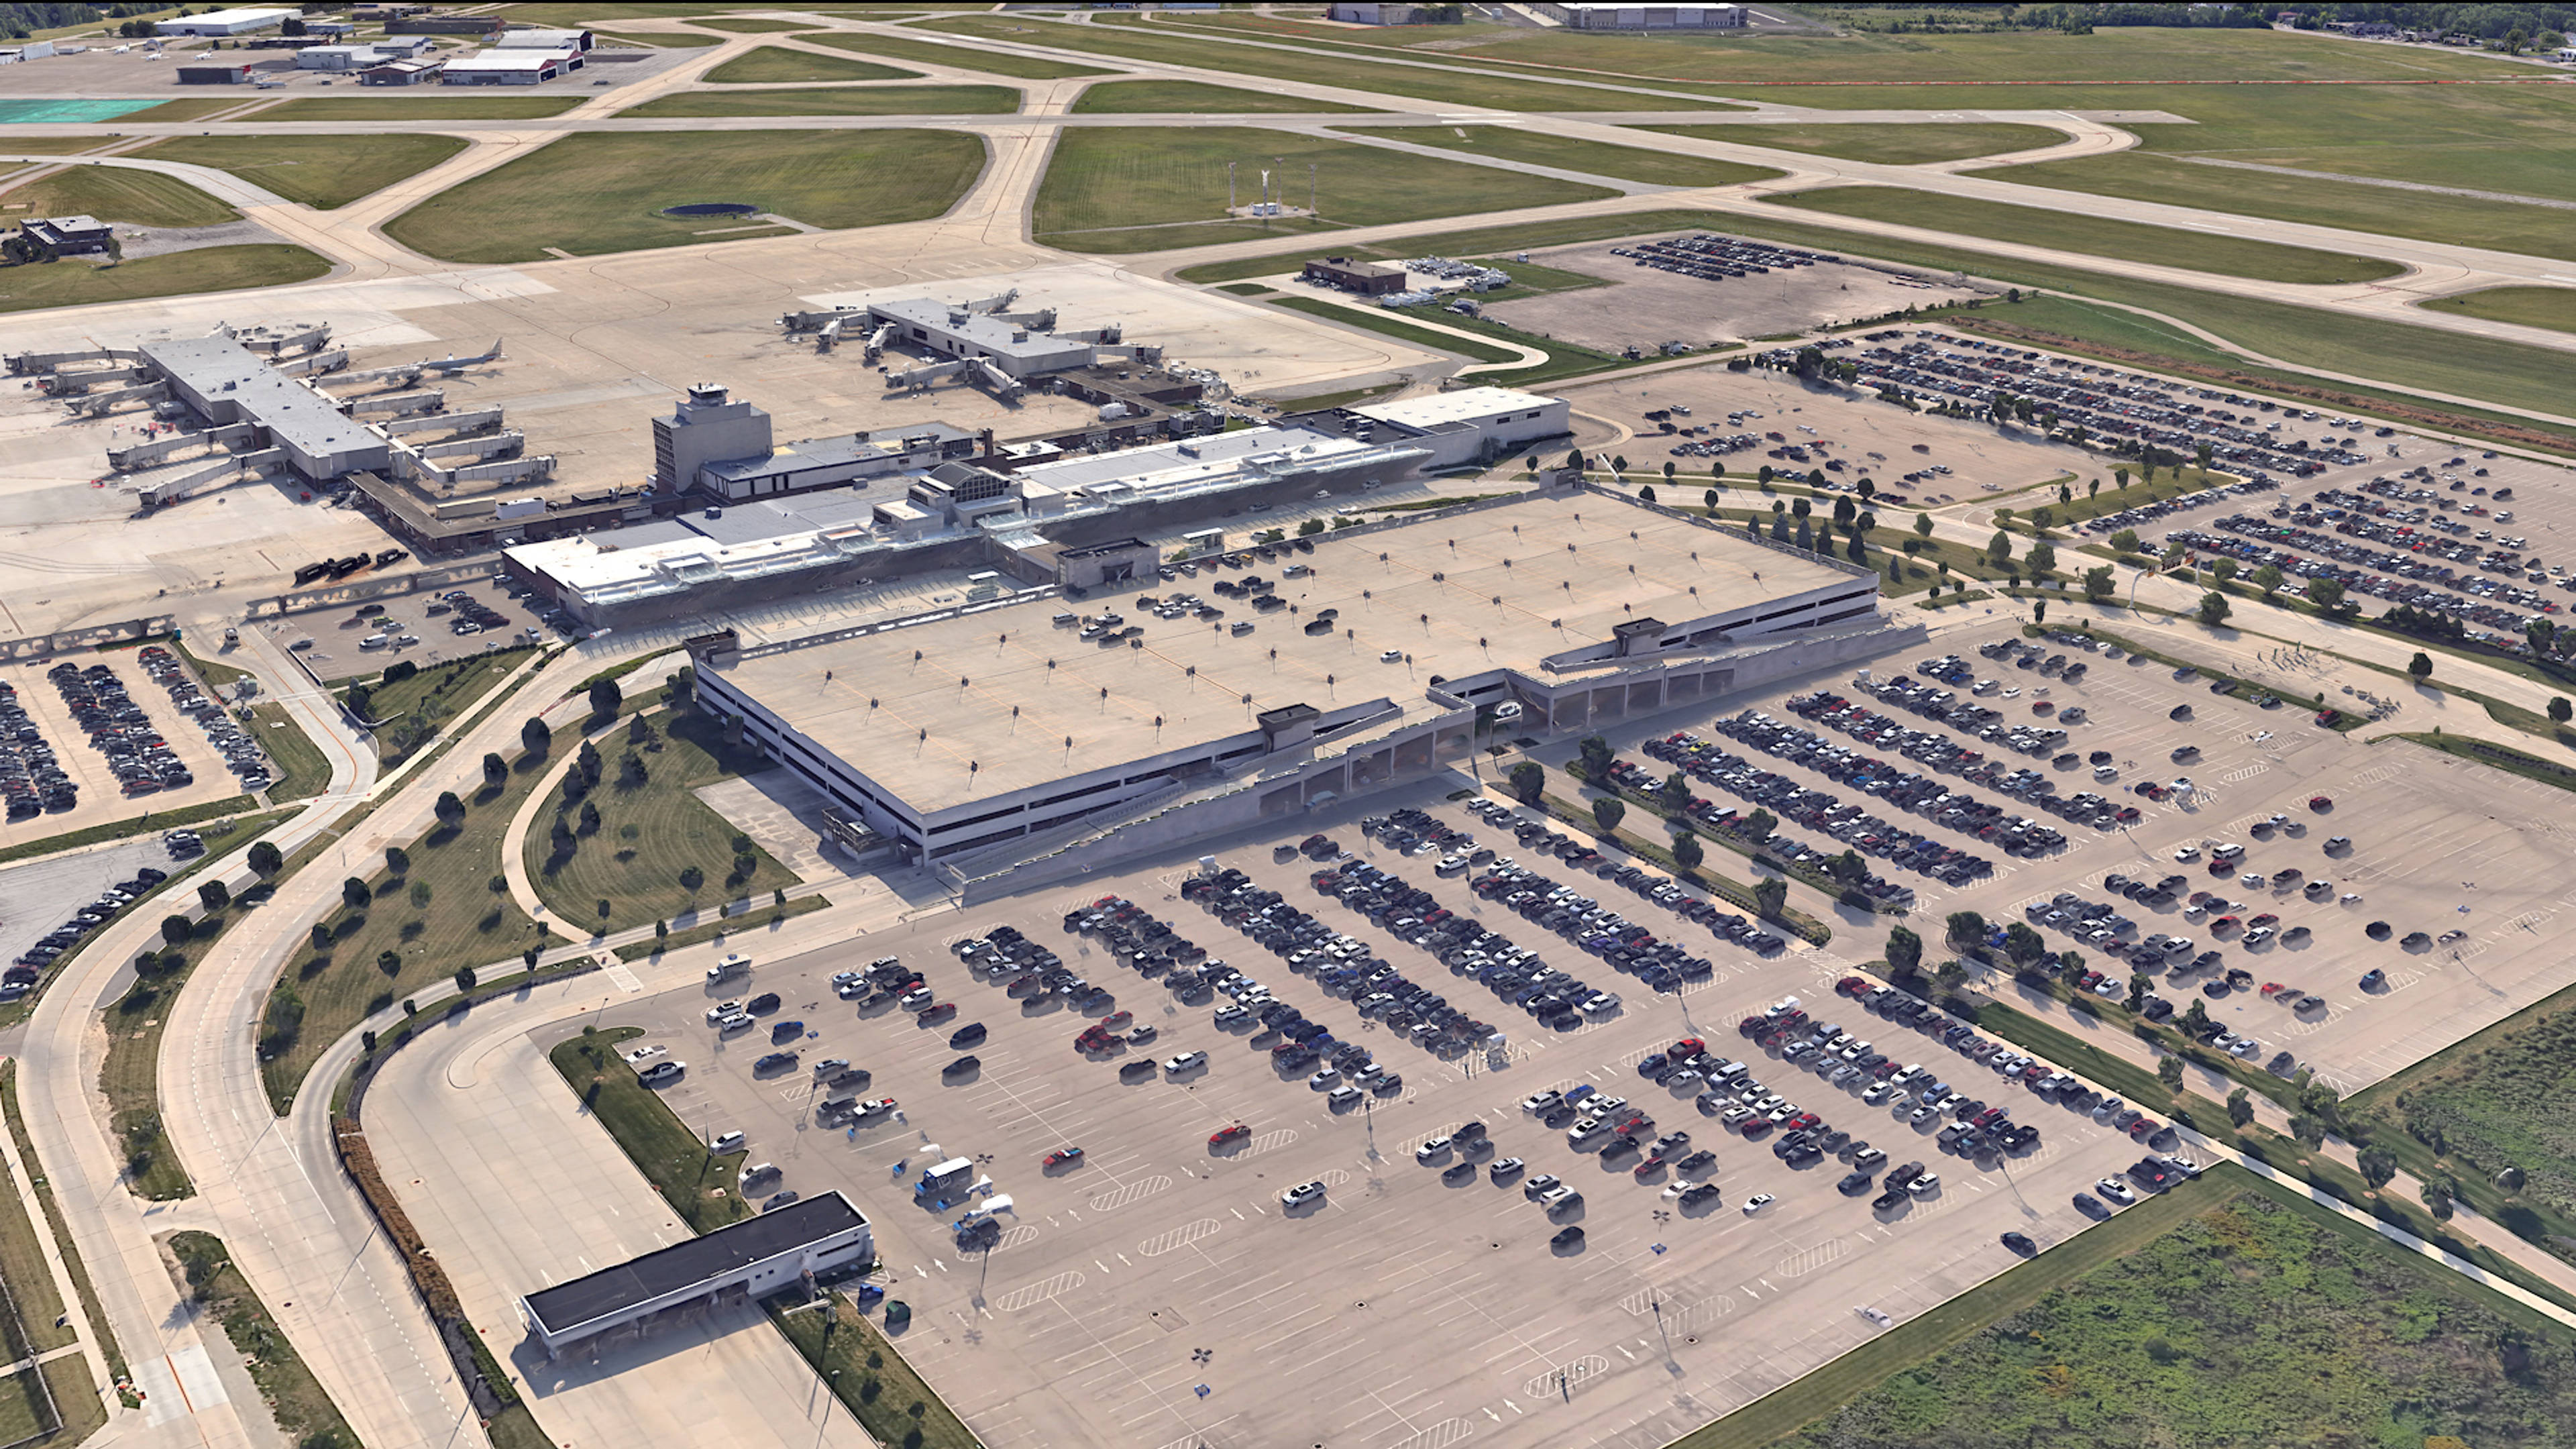 Aerial View of Dayton Airport Parking